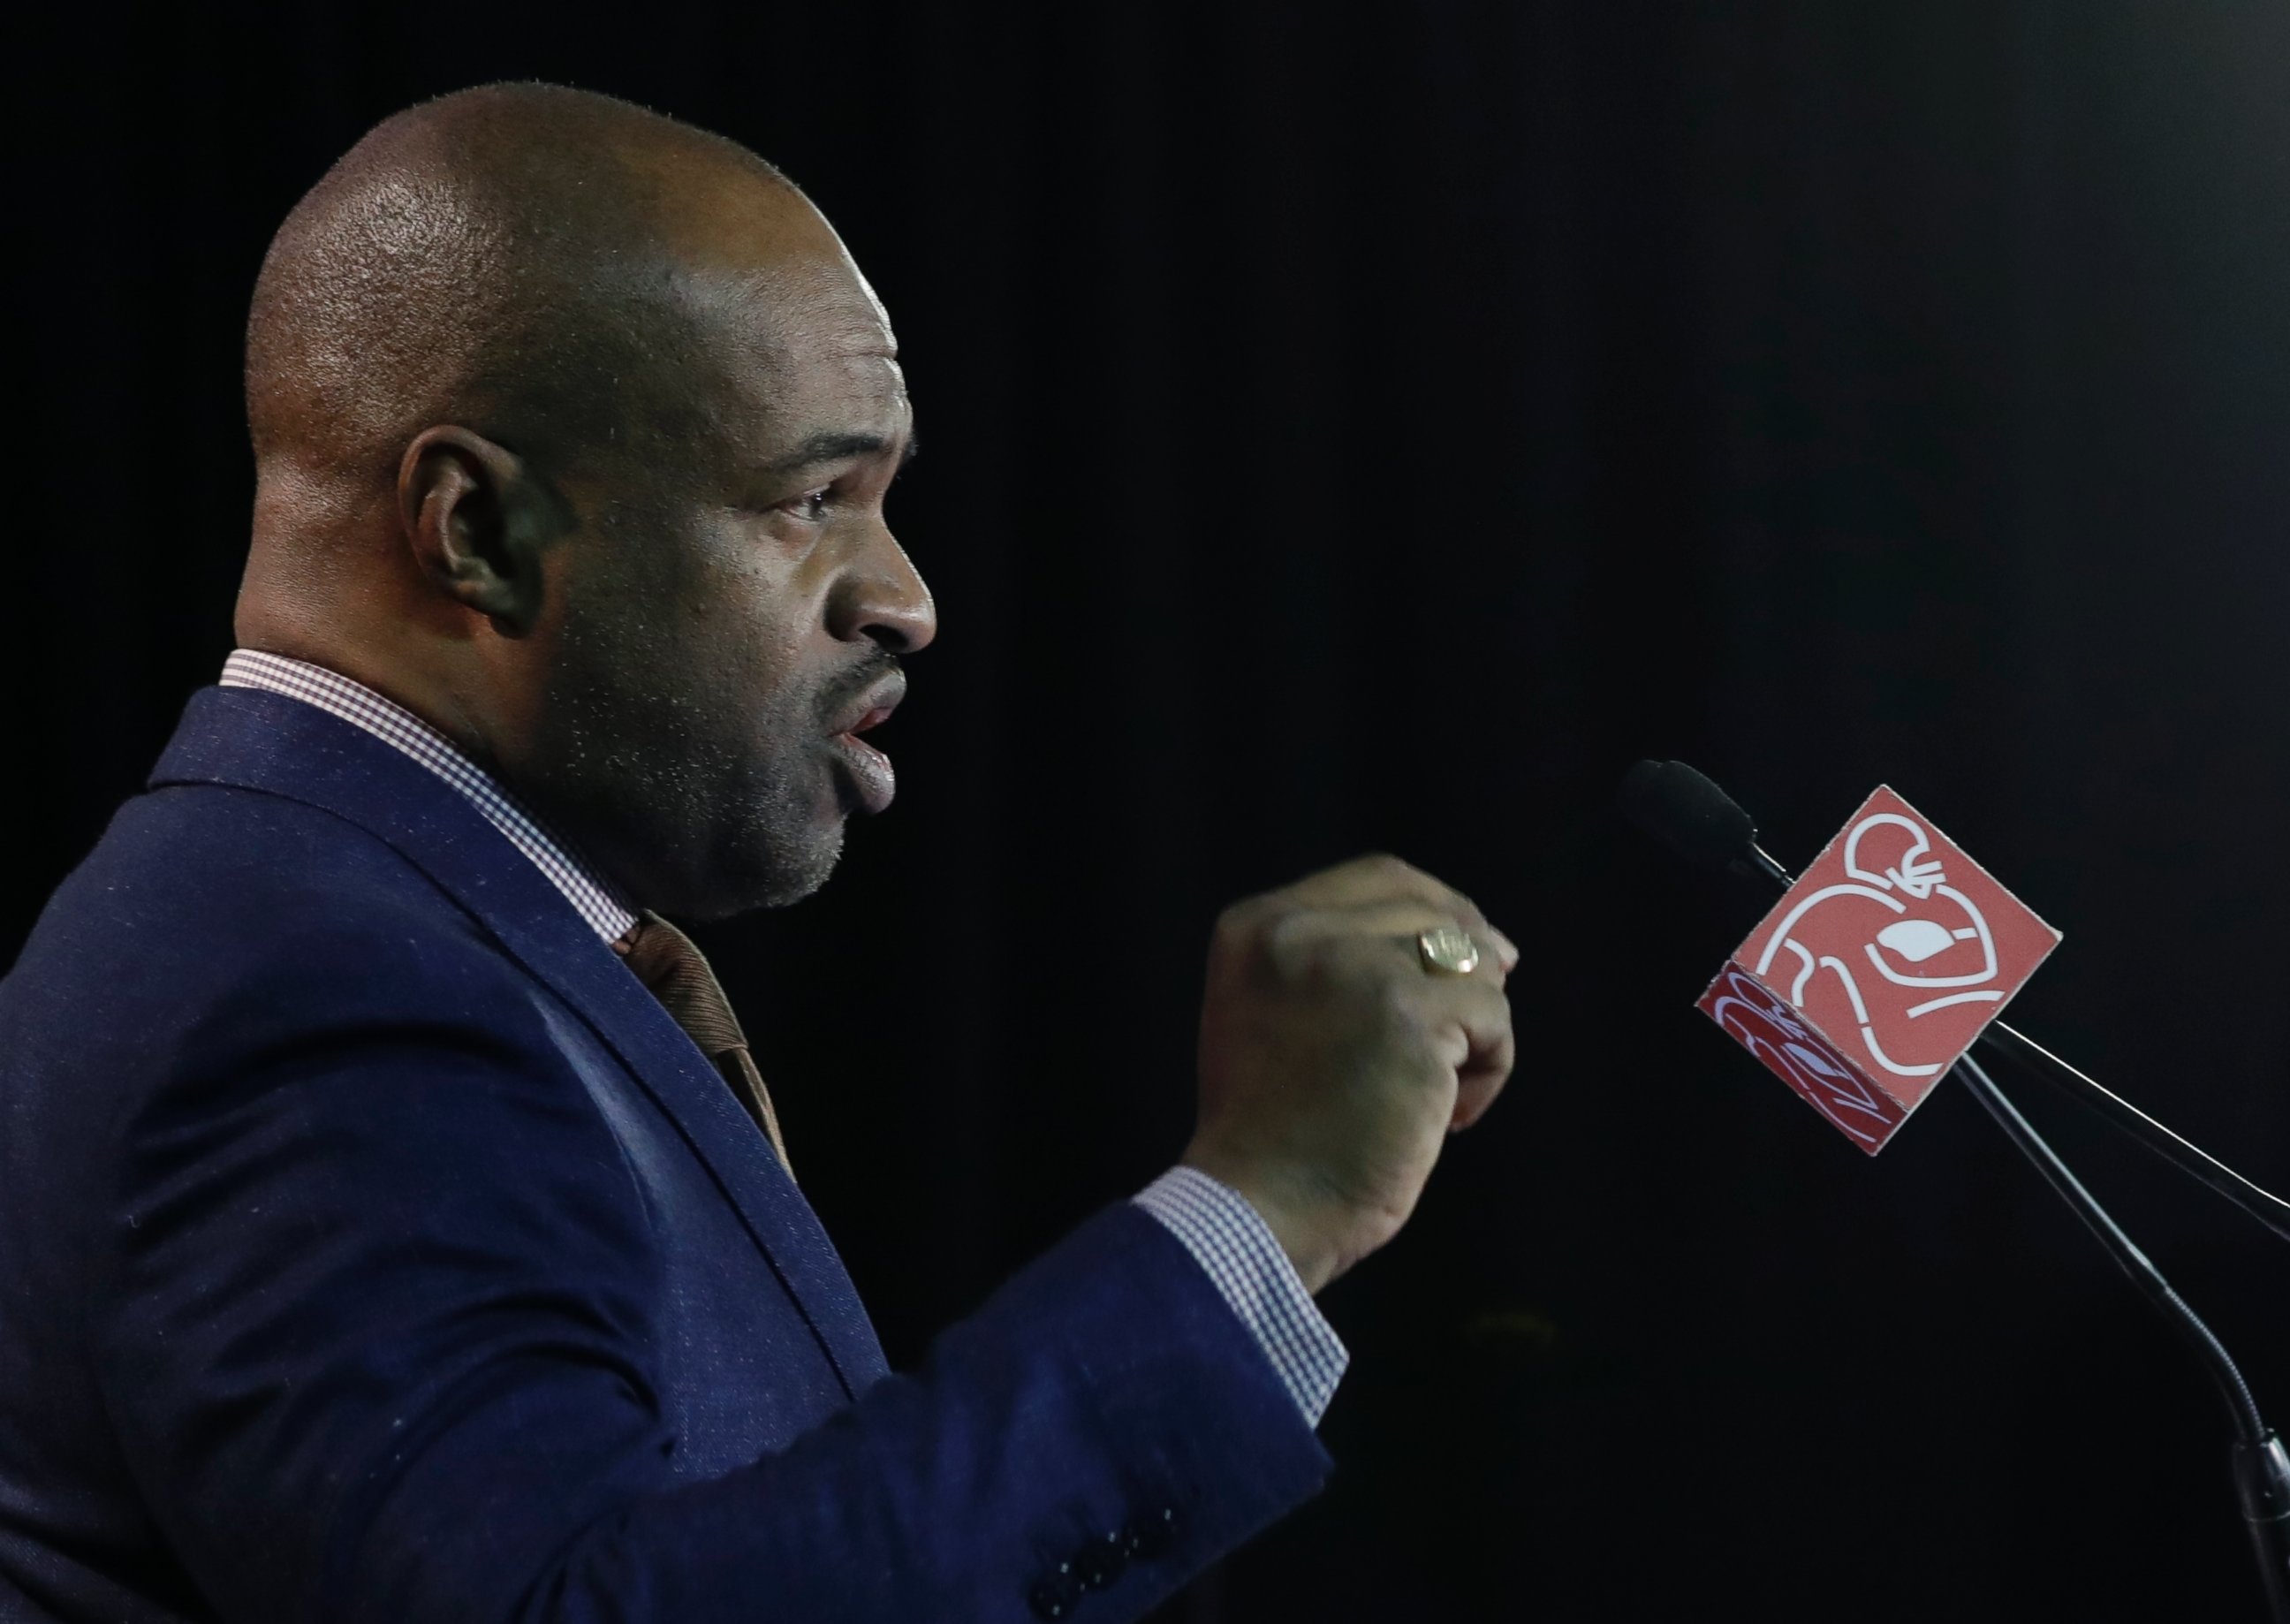 DeMaurice Smith, executive director of the NFL Players Association, speaks during a news conference at the NFL Super Bowl 52 Thursday, Feb. 1, 2018, in Minneapolis. (AP Photo/Matt Slocum)